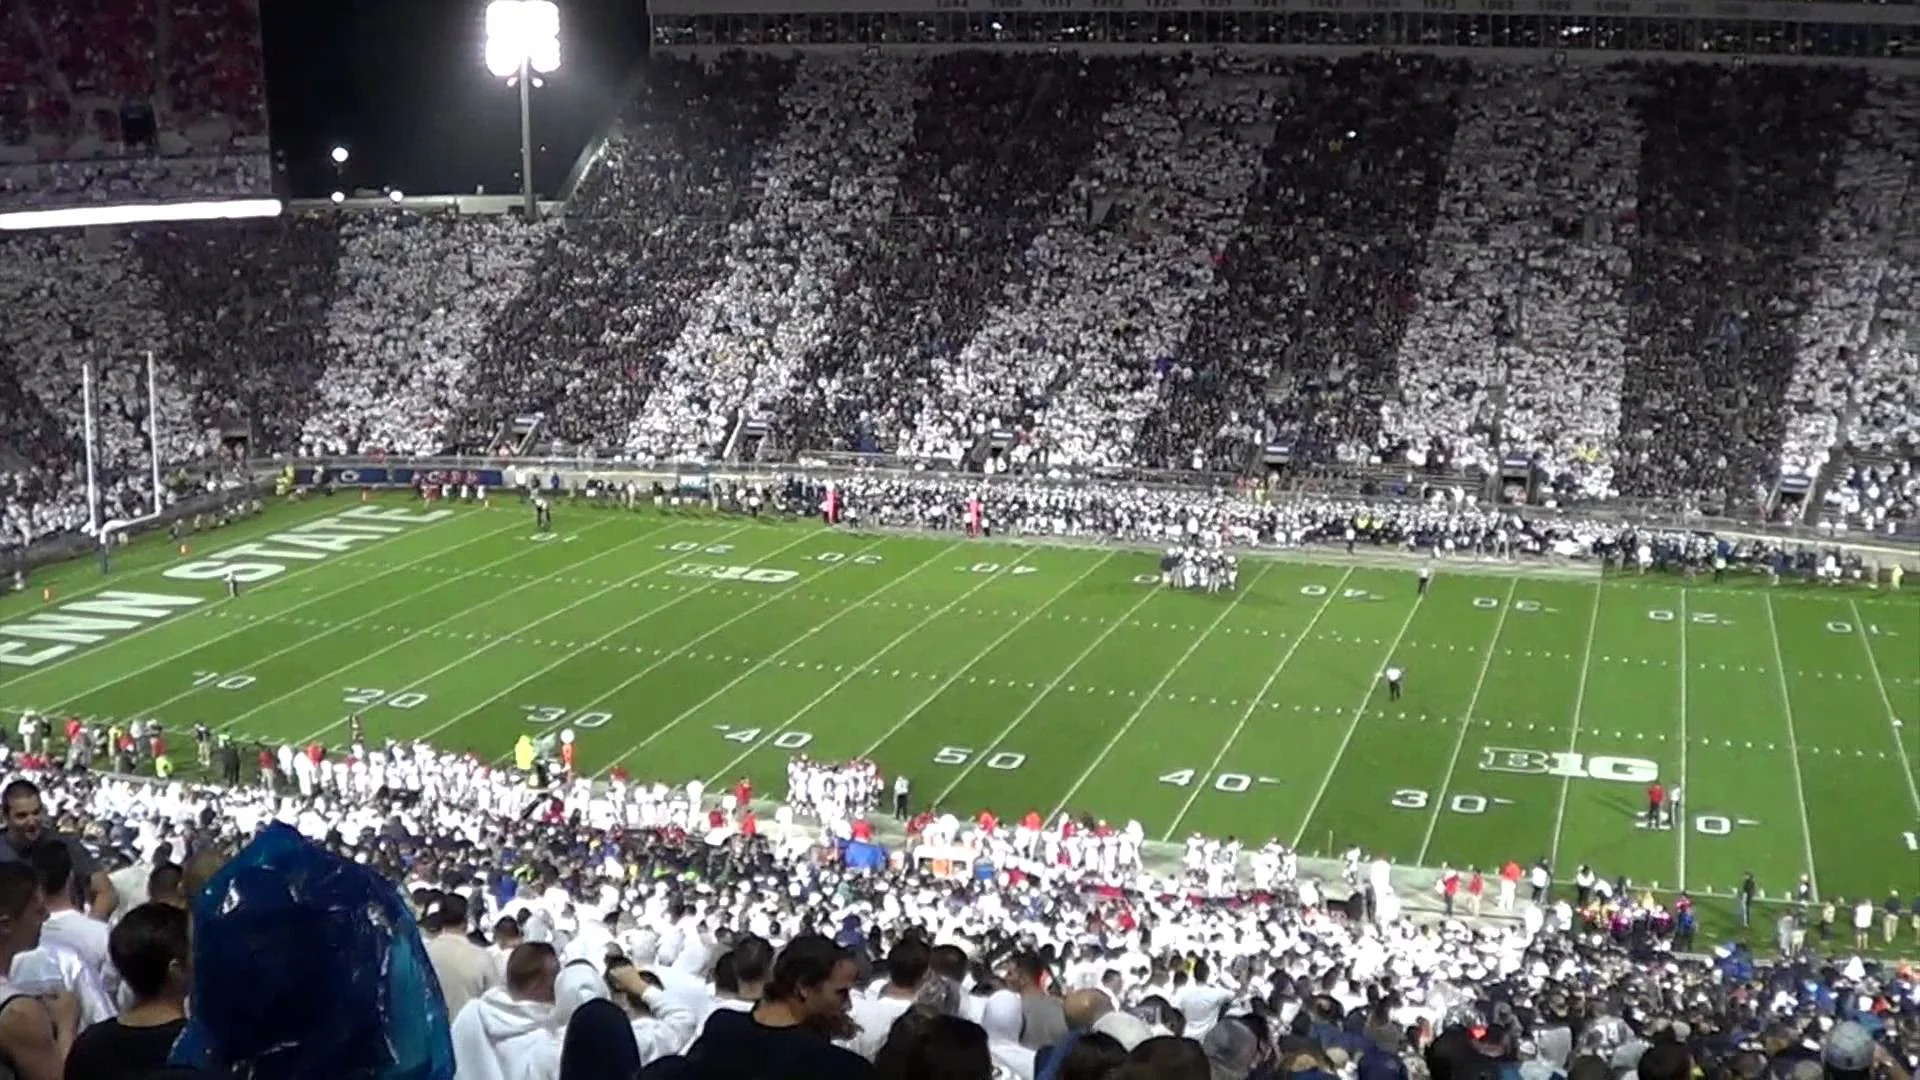 Penn State Student Section singing Living on a Prayer